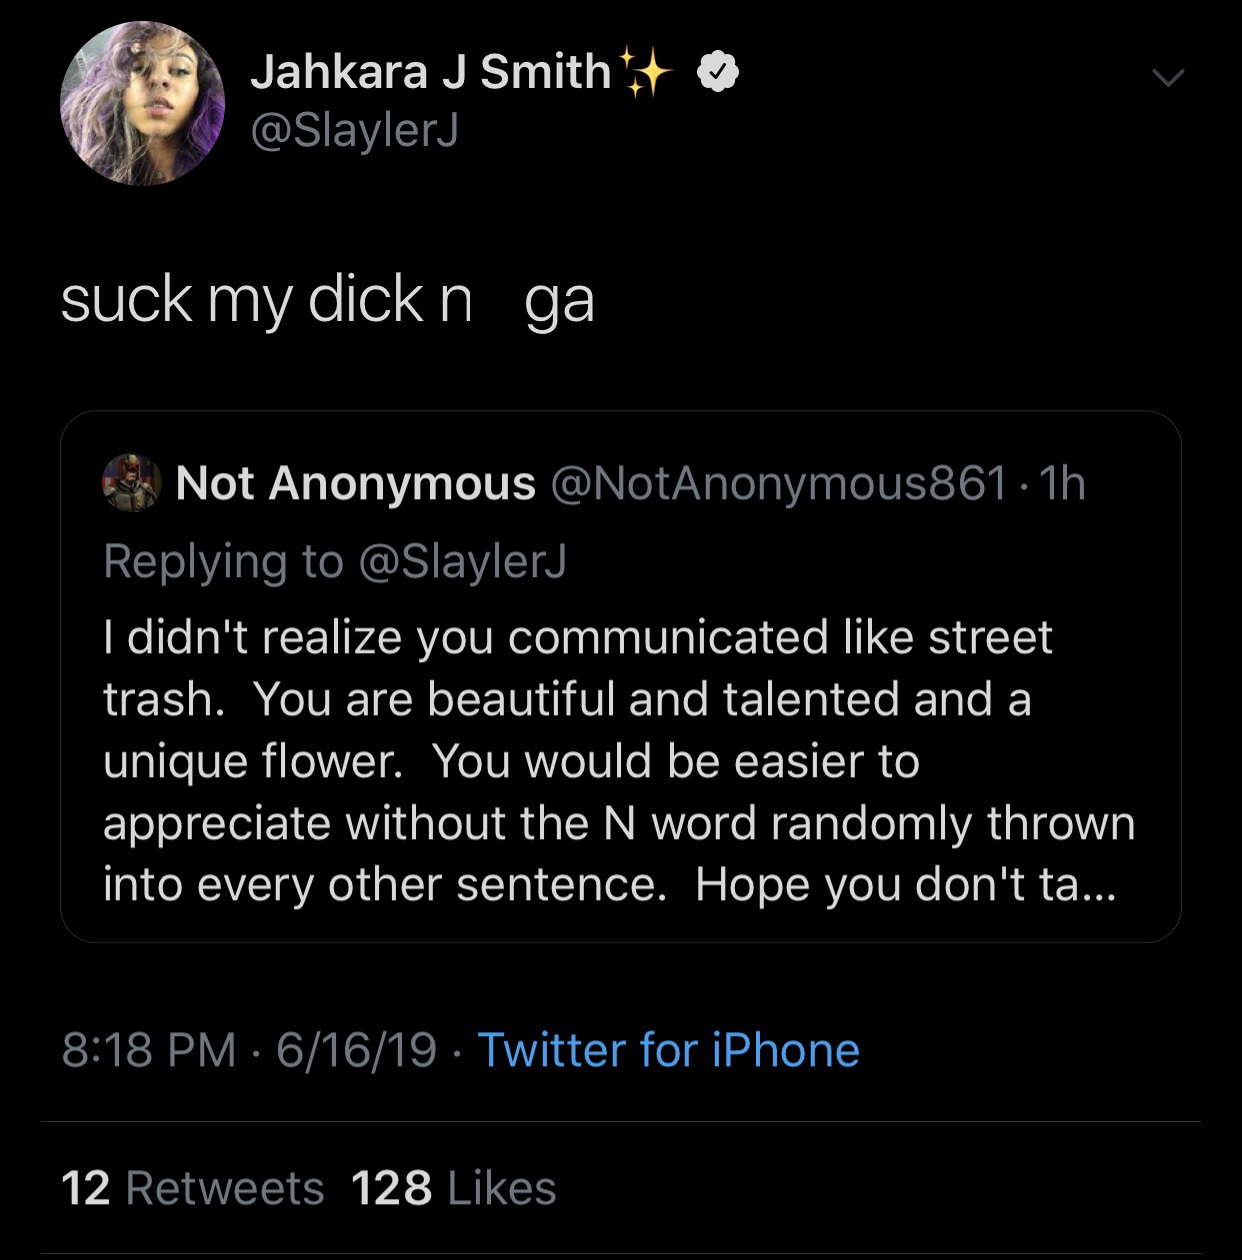 atmosphere - Jahkara J Smith suck my dick n ga Not Anonymous 1h I didn't realize you communicated street trash. You are beautiful and talented and a unique flower. You would be easier to appreciate without the N word randomly thrown into every other sente